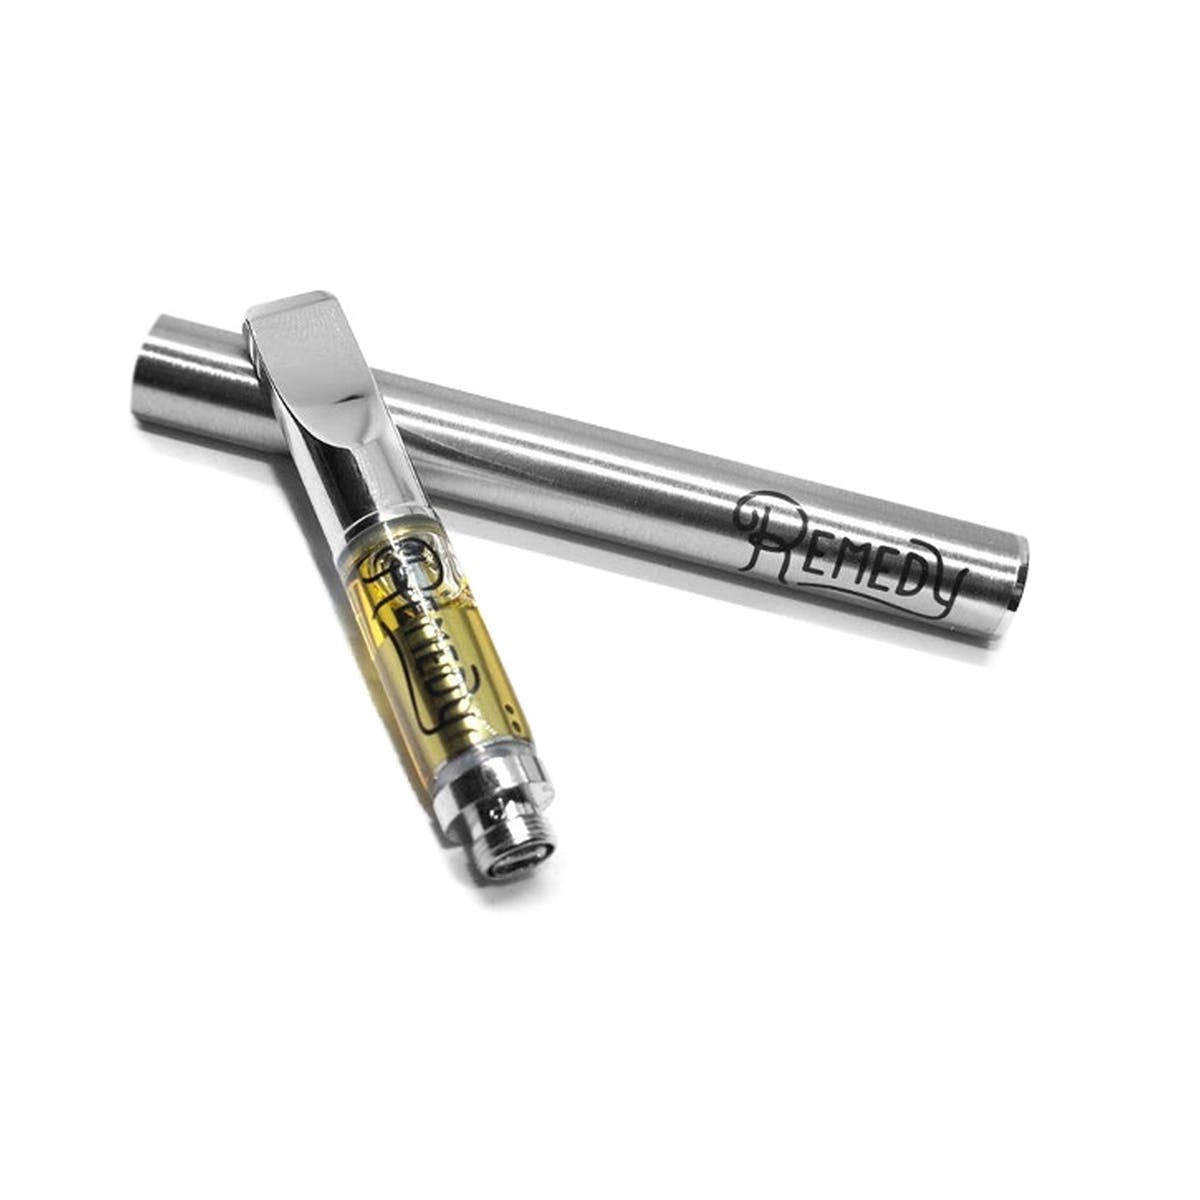 concentrate-remedy-tangerine-5-cartridge